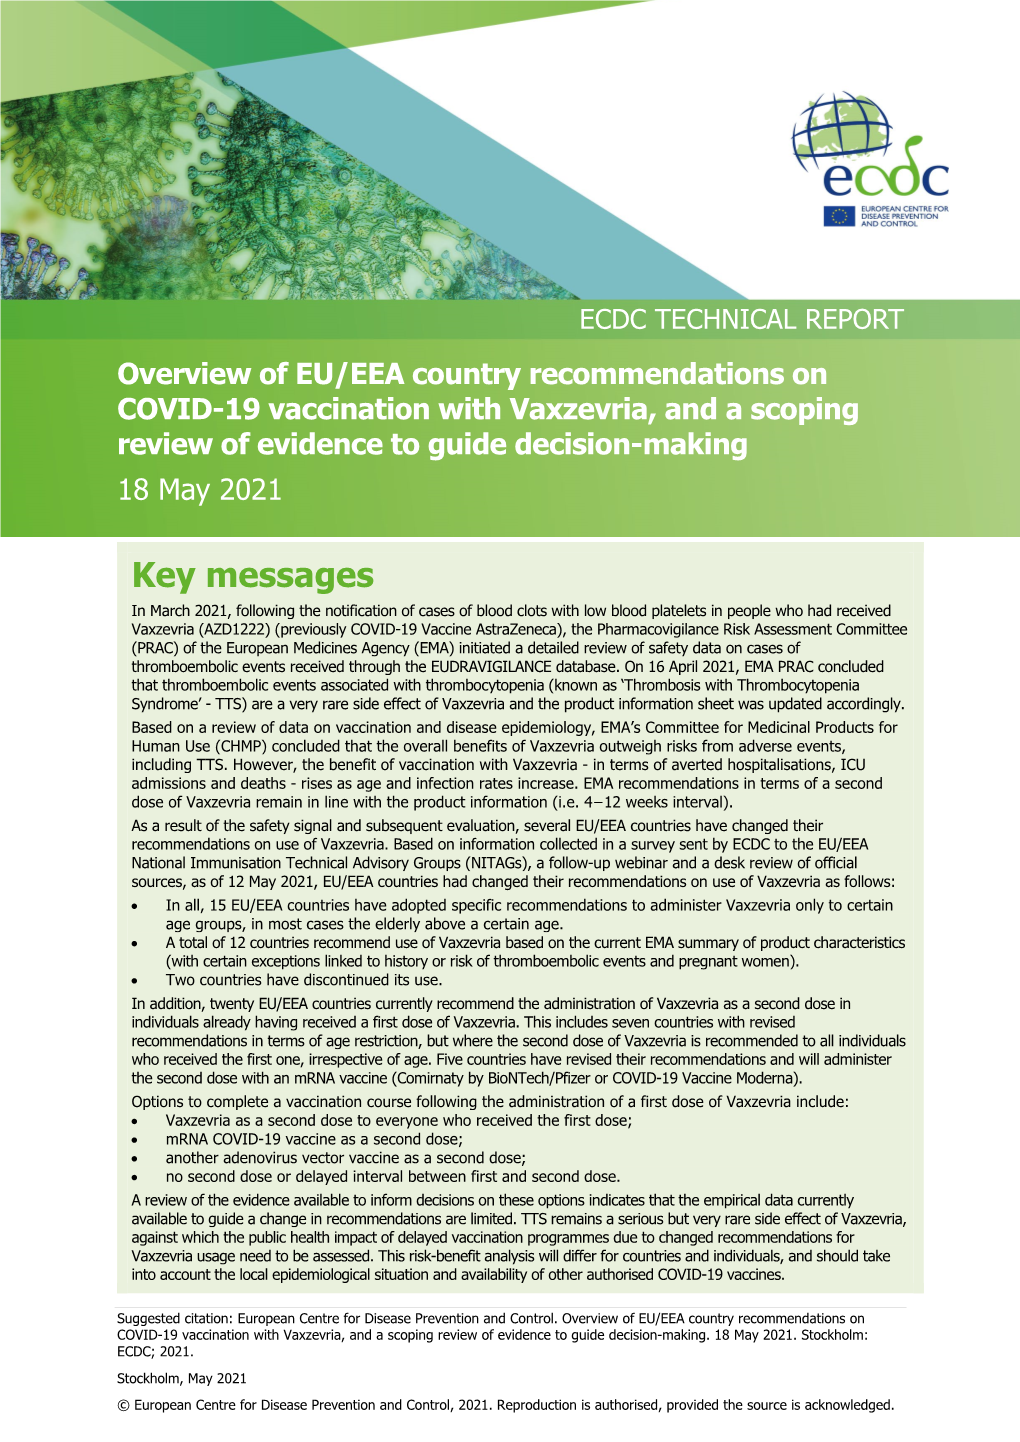 Overview of EU/EEA Country Recommendations on COVID-19 Vaccination with Vaxzevria, and a Scoping Review of Evidence to Guide Decision-Making 18 May 2021